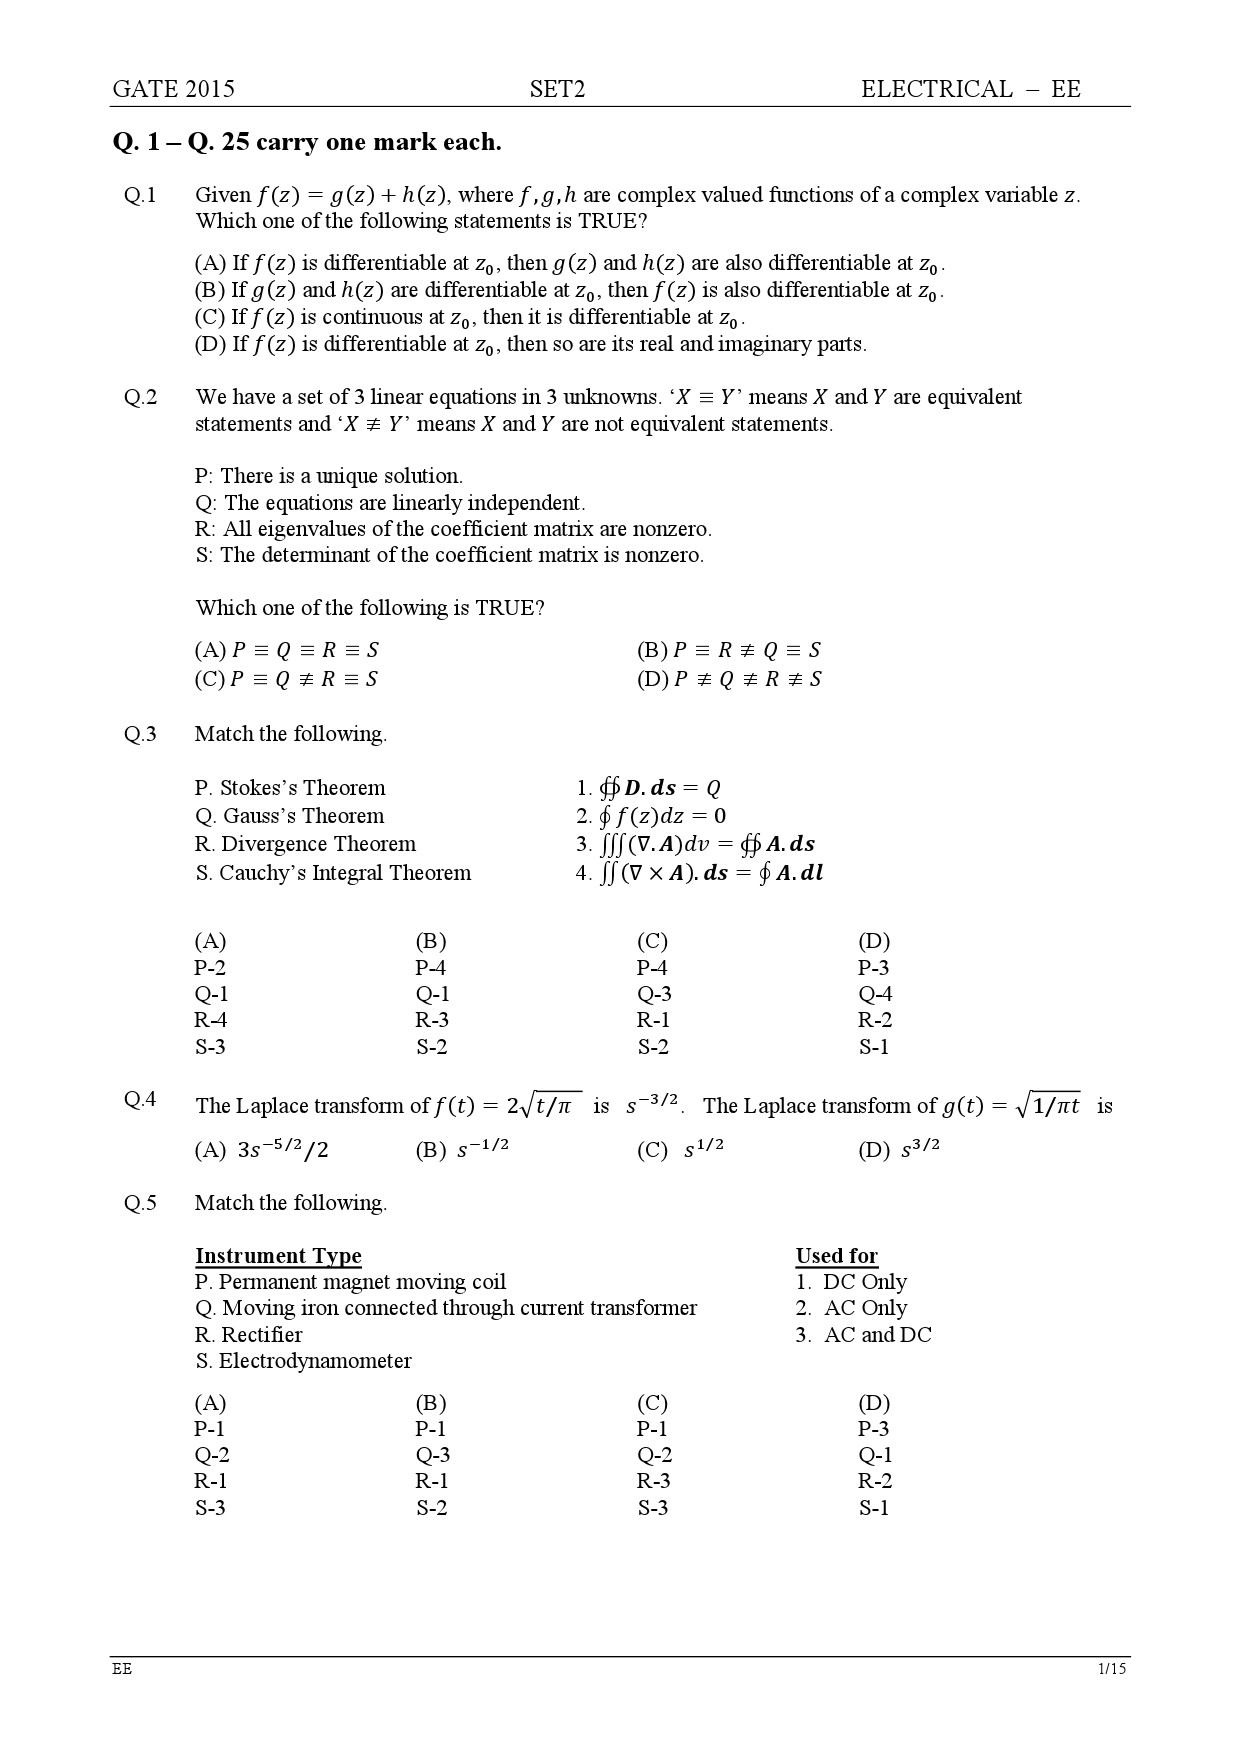 GATE Exam Question Paper 2015 Electrical Engineering Set 2 1